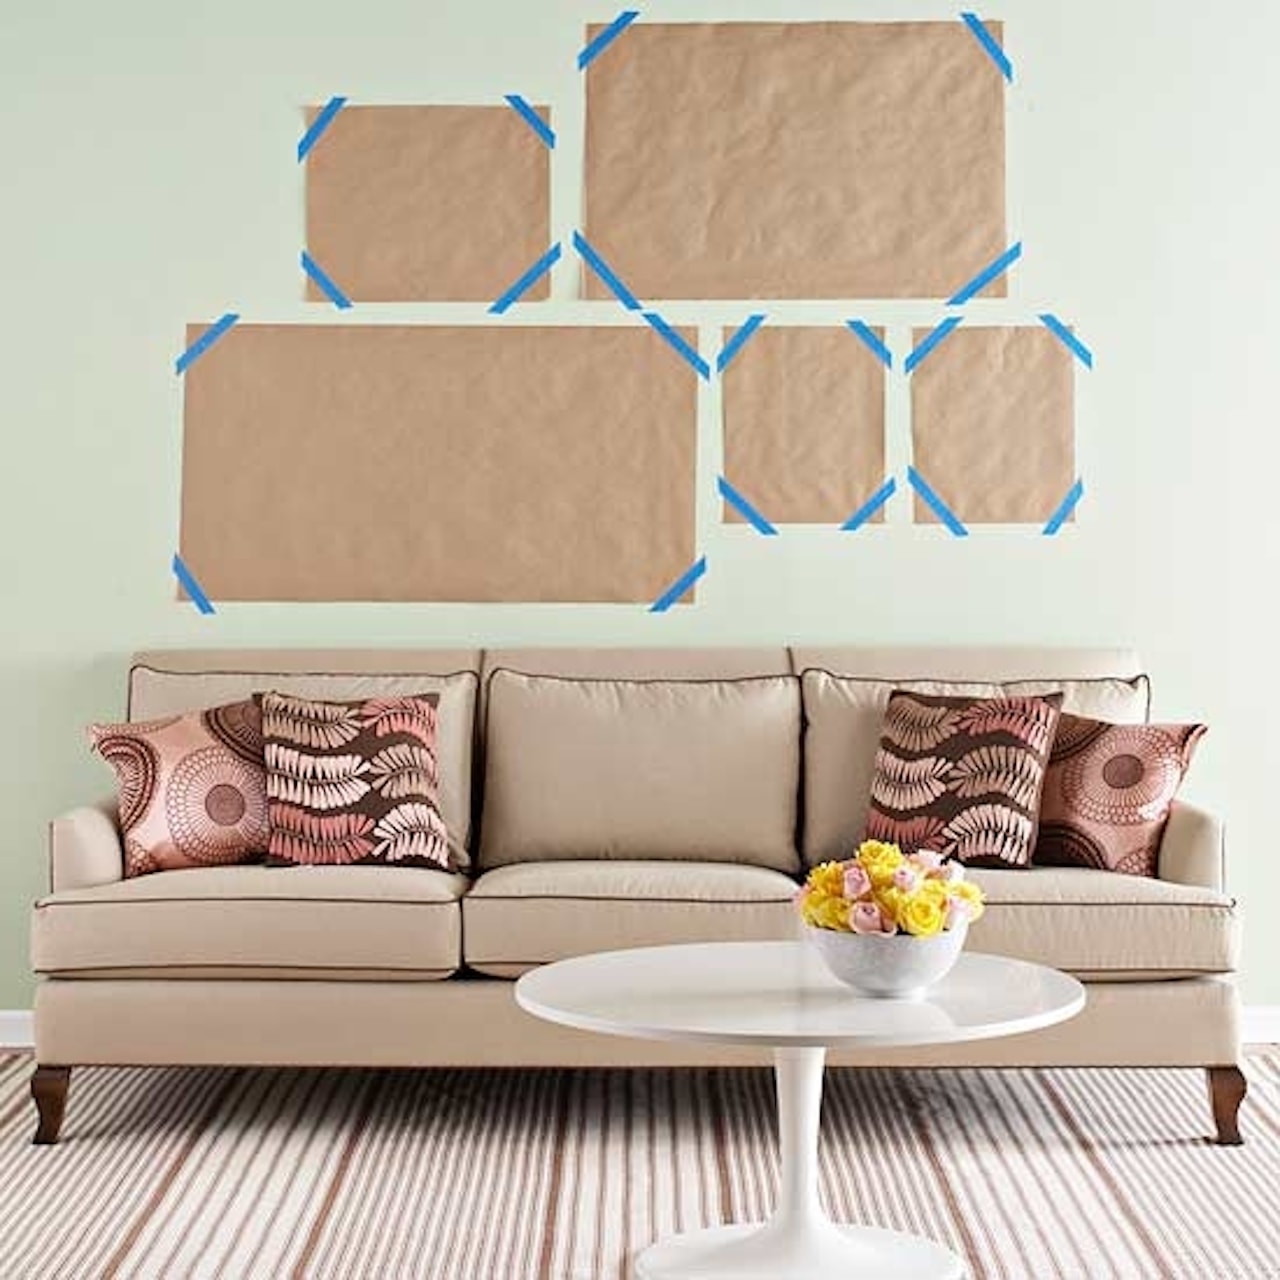 gallery wall ideas practice layout paper